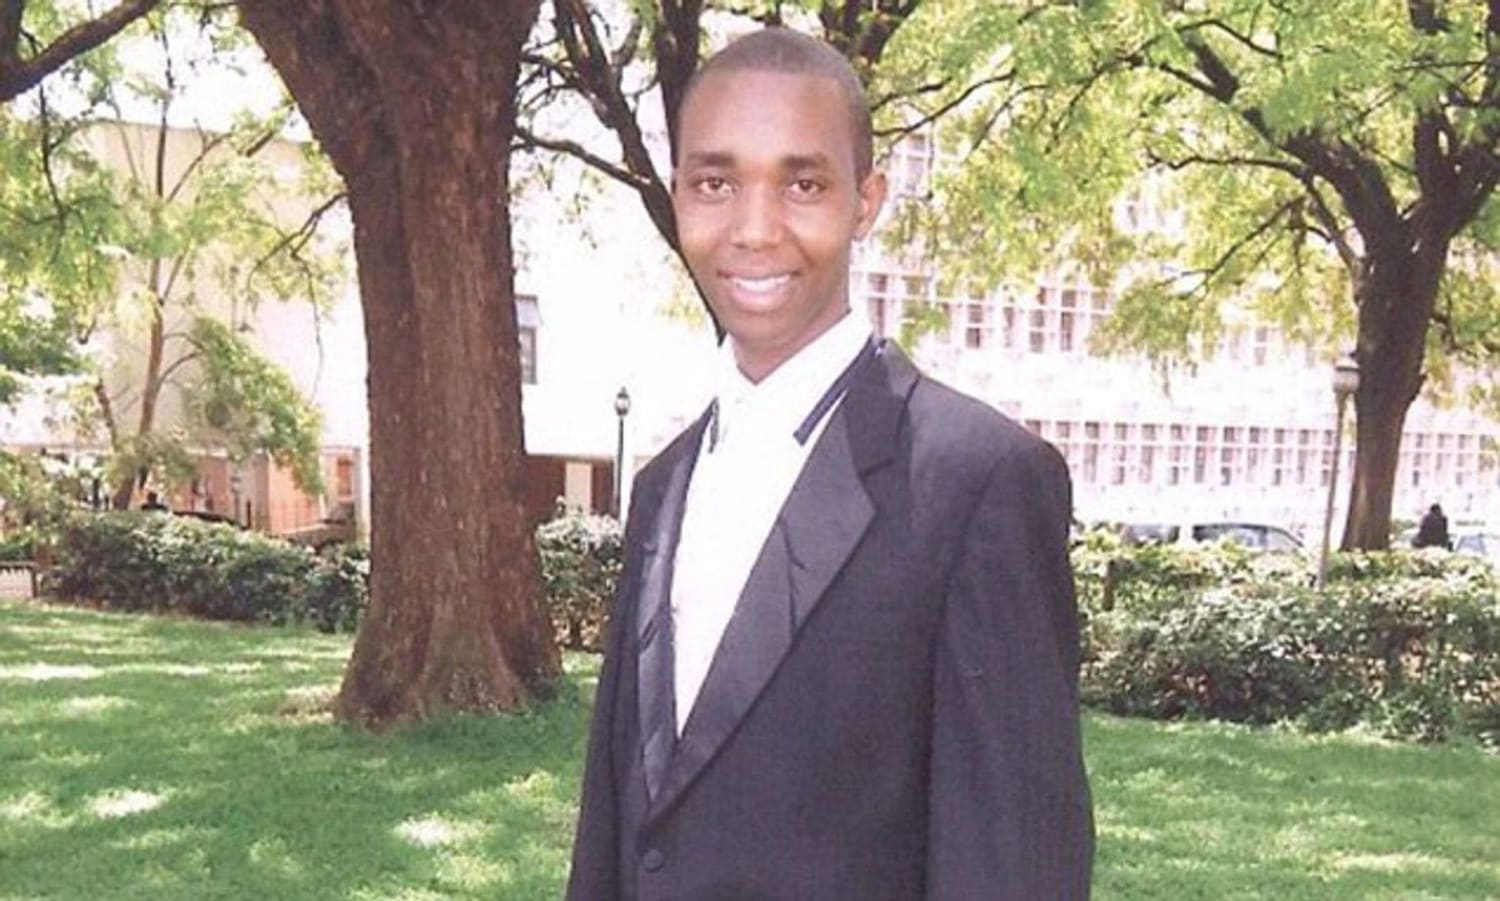 In 2015, Felix Kiprono, a lawyer in Nairobi, Kenya, offered 50 cows, 70 sheep, and 30 goats to Barack Obama in exchange for his then 17-year-old daughter, Malia's hand in marriage.